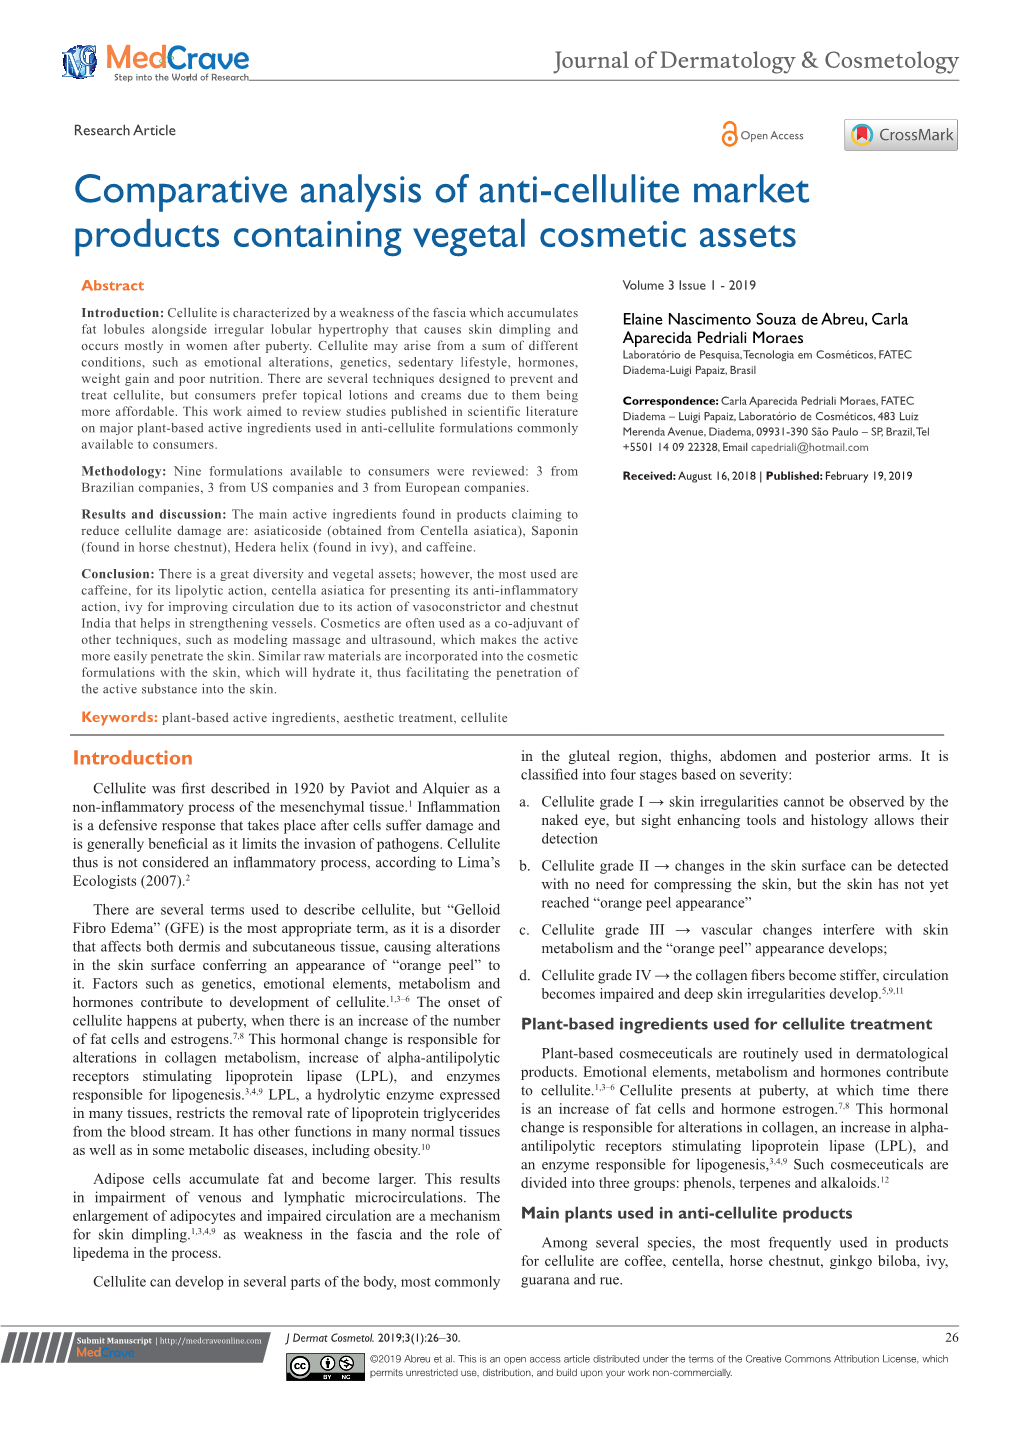 Comparative Analysis of Anti-Cellulite Market Products Containing Vegetal Cosmetic Assets